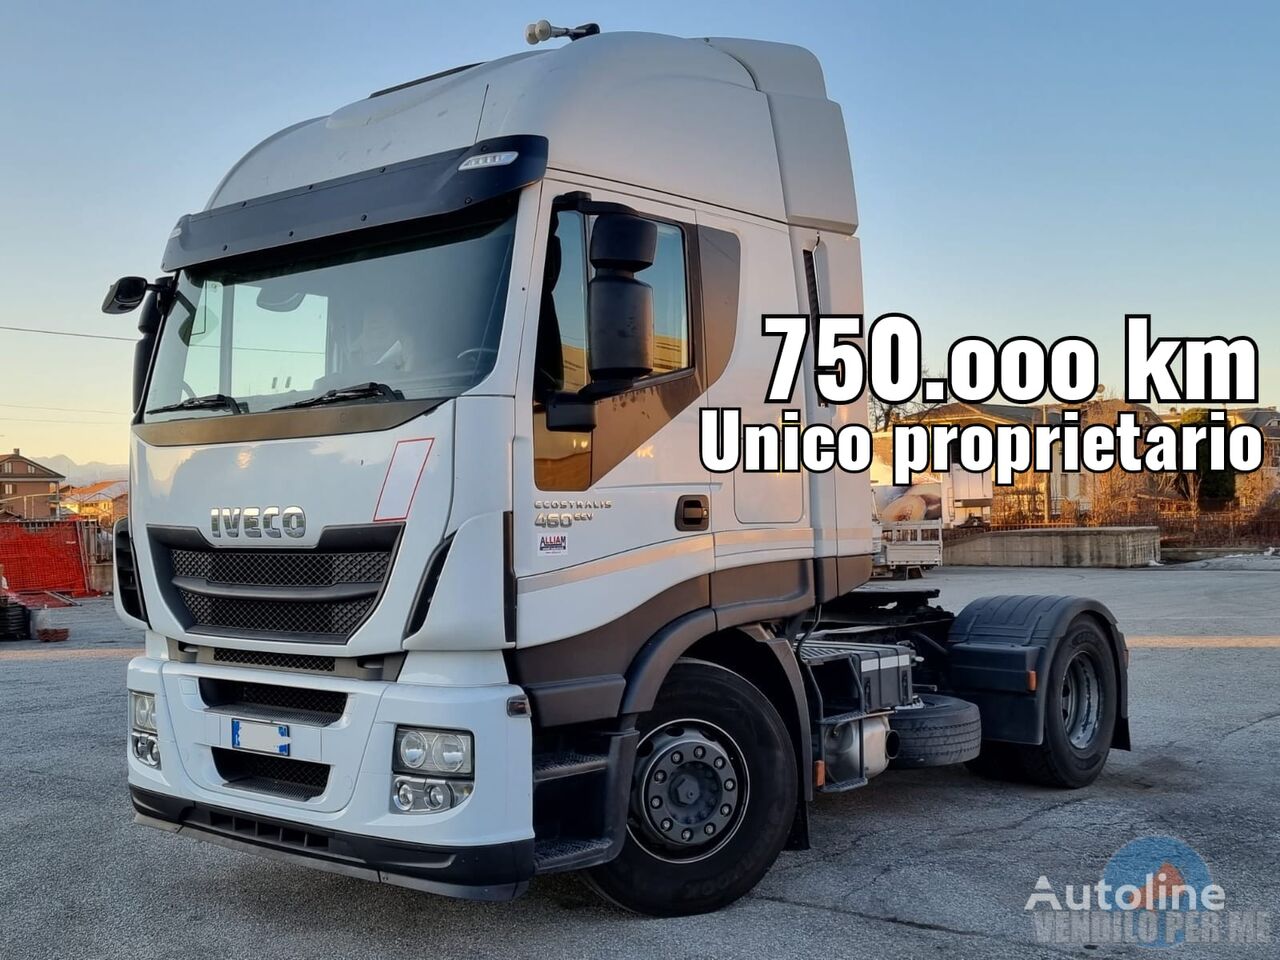 IVECO Stralis 460 truck tractor